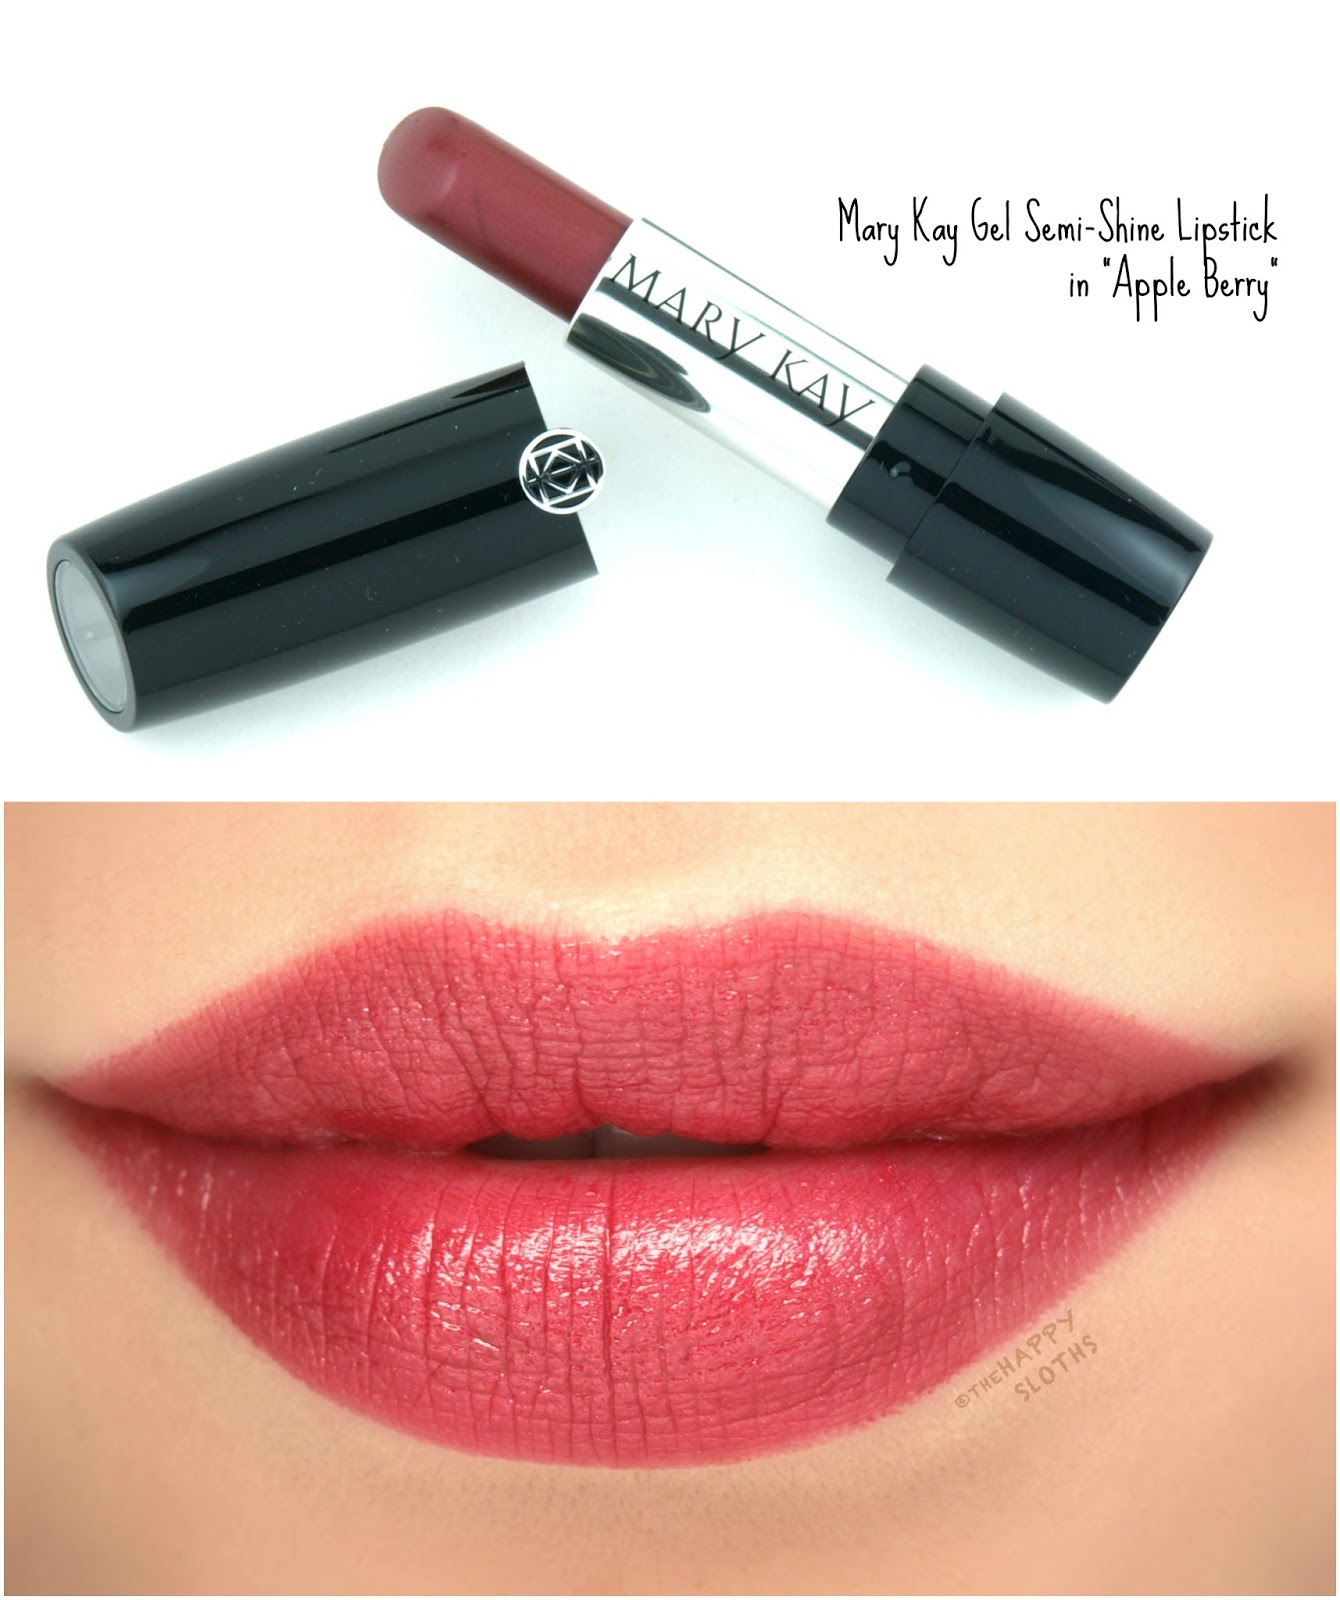 *NEW* Mary Kay Gel Semi-Shine Lipstick: Review and Swatches | The Happy ...